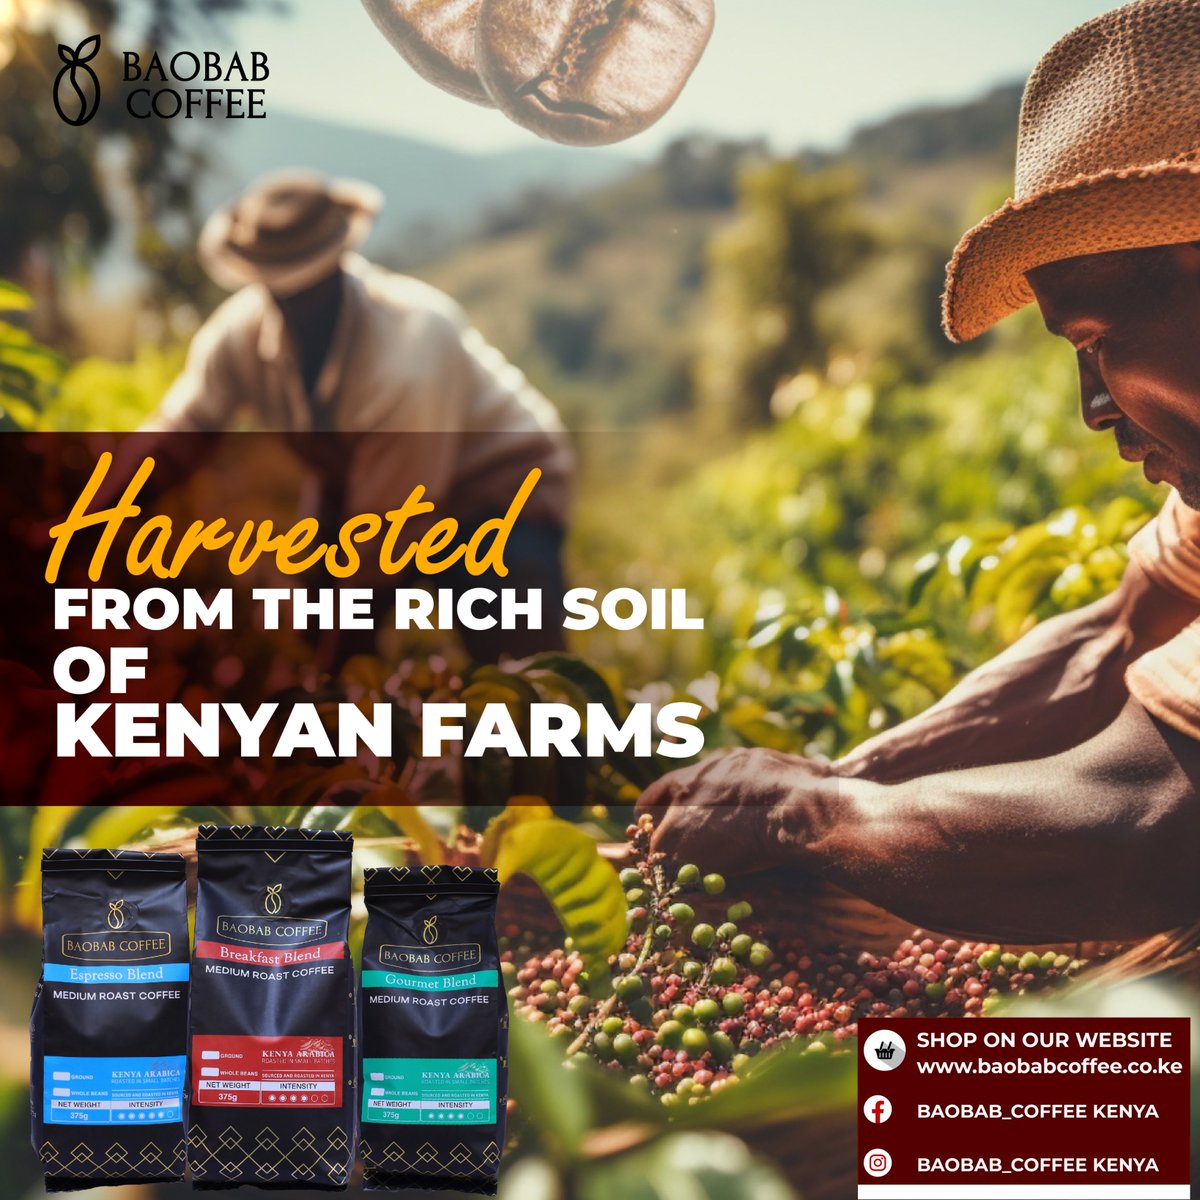 From the lush Kenyan highlands to your cup, experience the freshness and flavor of our exquisite coffee! ☕🌿Order now and experience the best coffee
#BaobabCoffee #AuthenticFlavors #coffee #coffeetime #coffeelover #coffeeshop #coffeeaddict #coffeelovers #coffeegram #coffeebreak